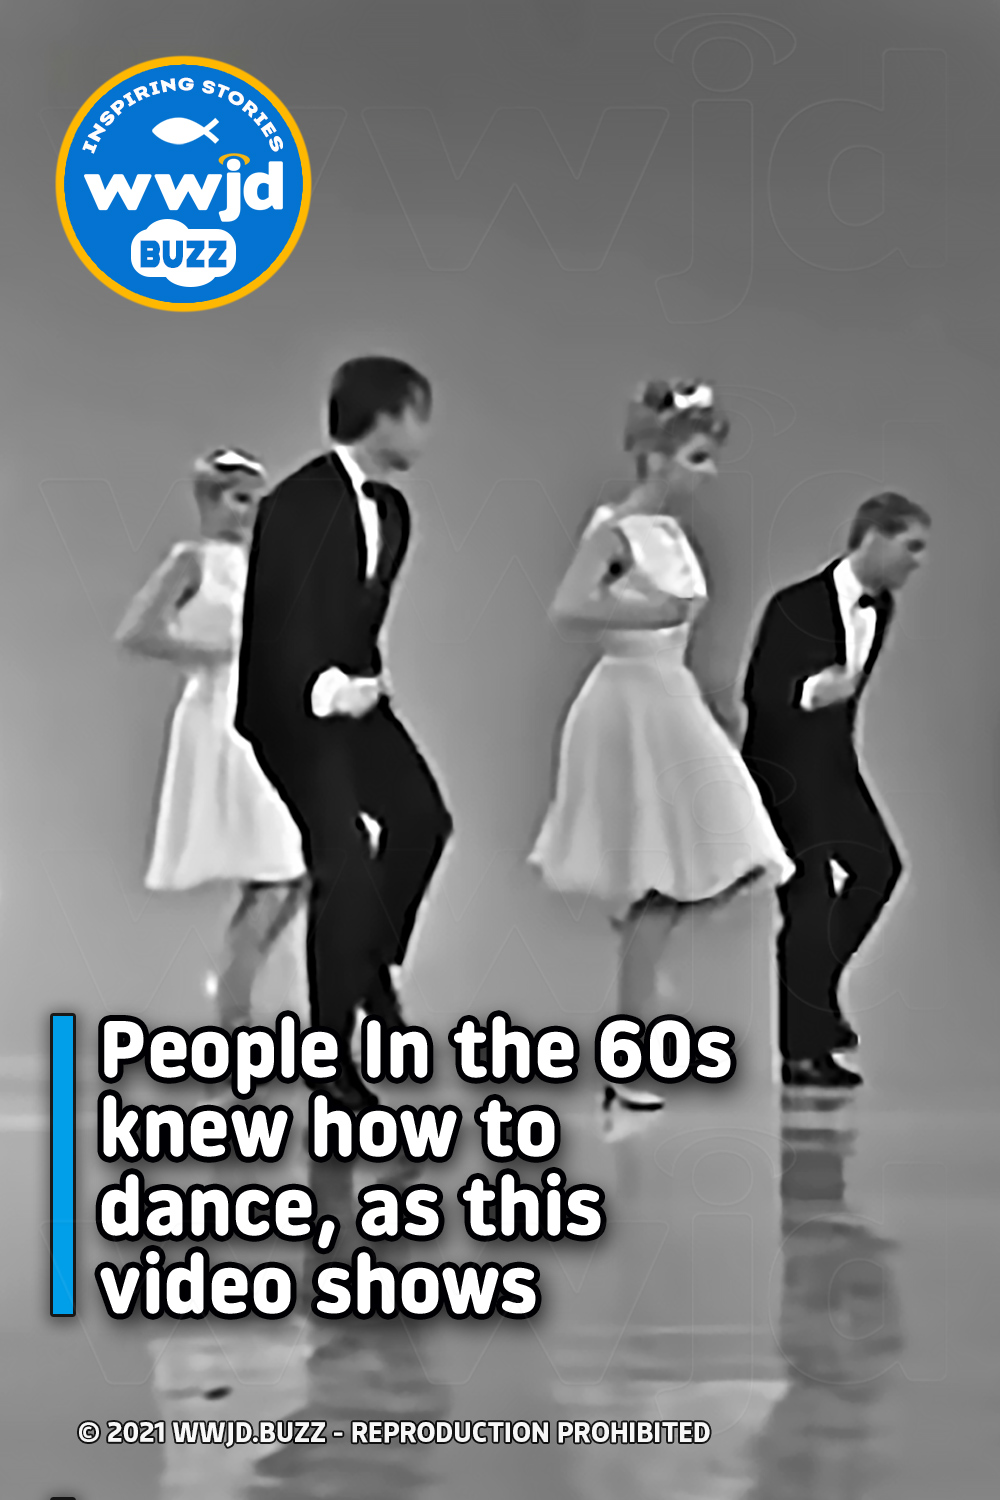 People In the 60s knew how to dance, as this video shows